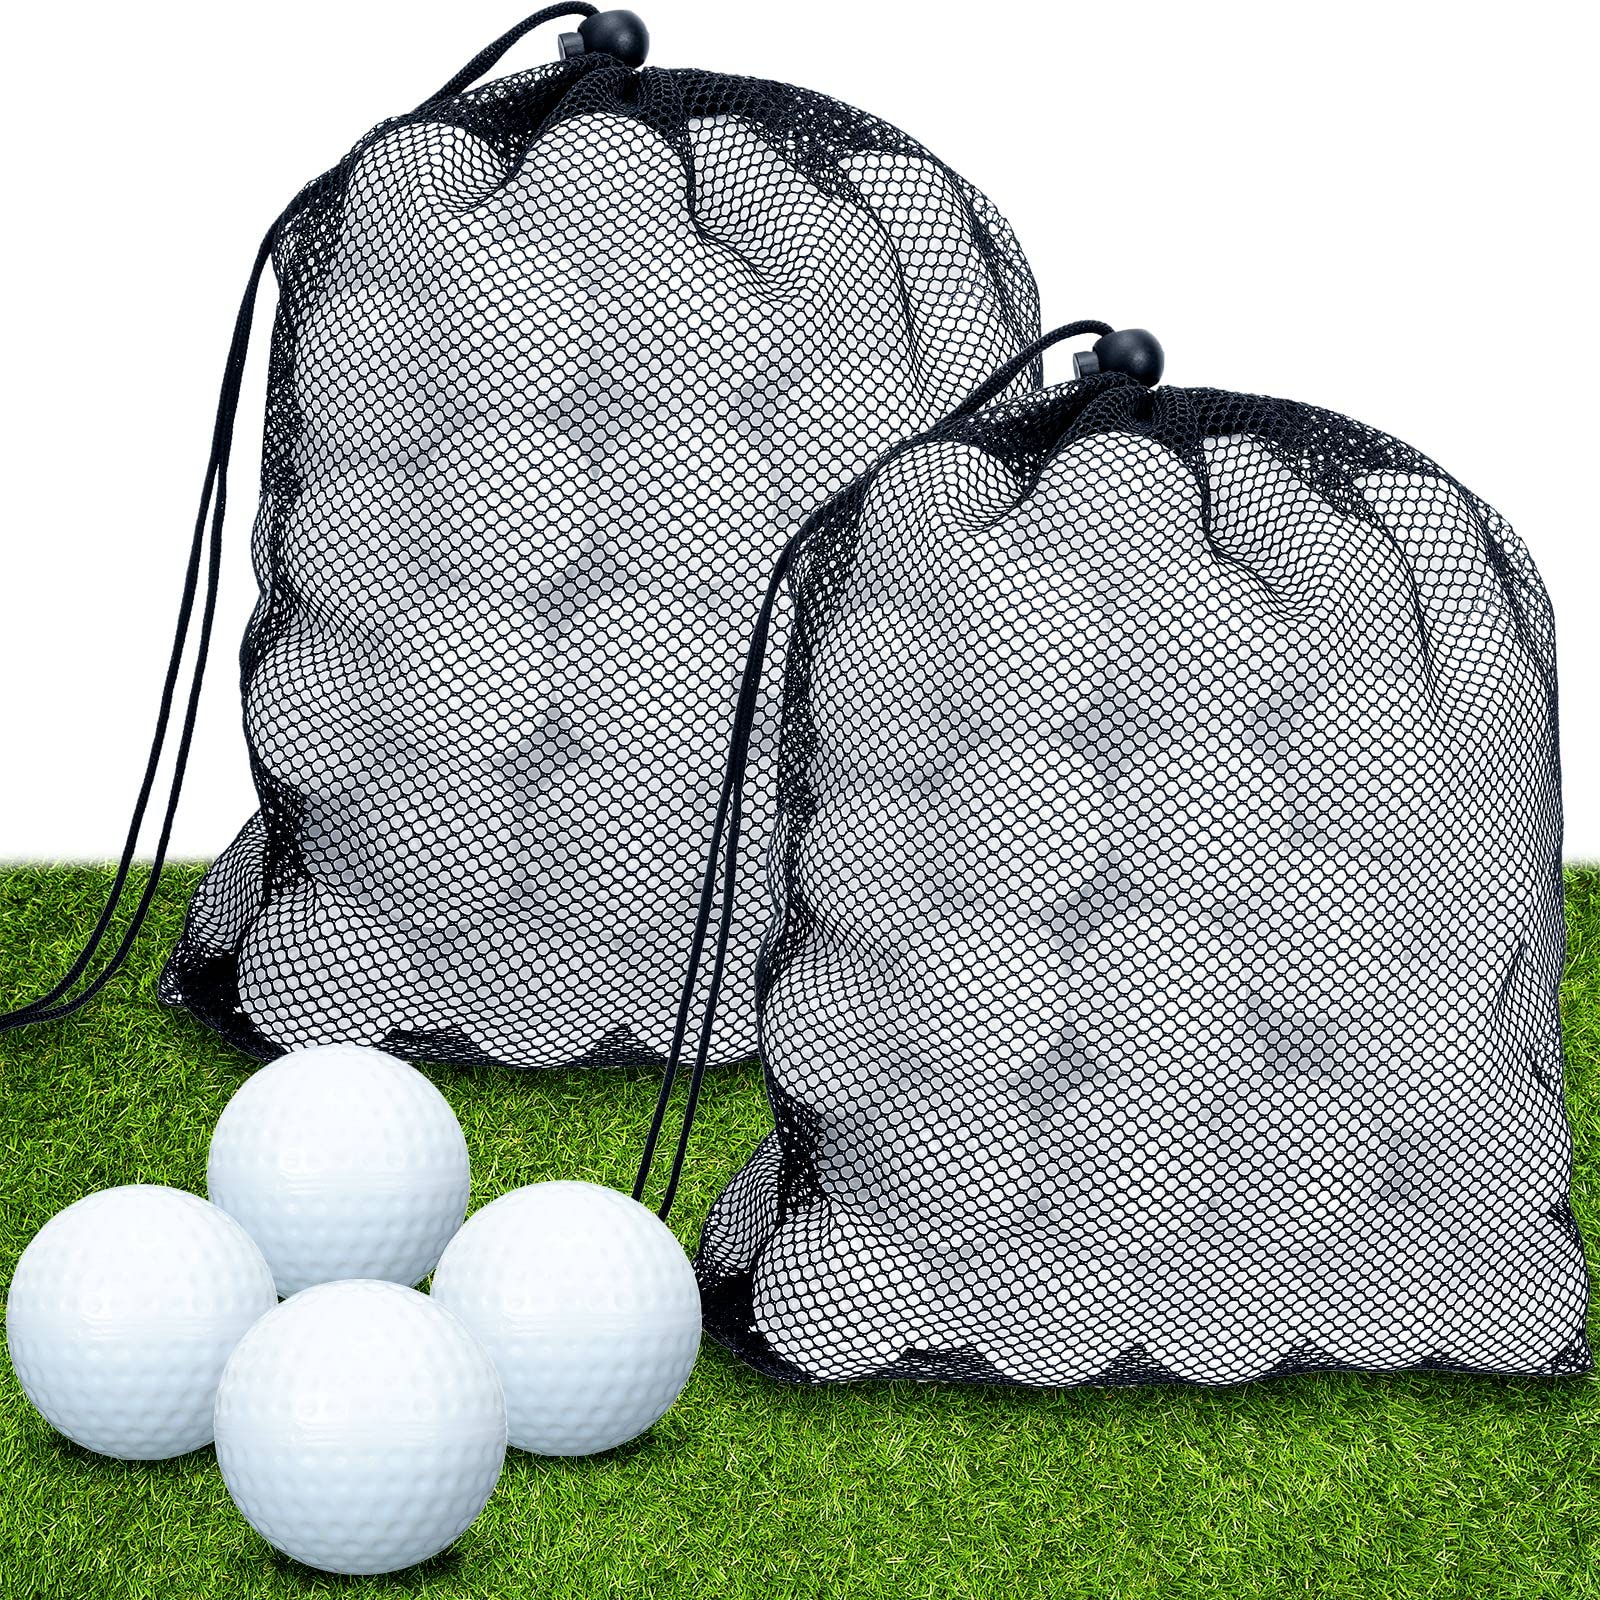 200 Pcs Plastic Practice Golf Balls Limited Flight Training Golf Balls  Swing Practice Indoor Golf Balls with 2 Pcs Mesh Golf Ball Bags for Home  Indoor Outdoor Backyard Driving Range